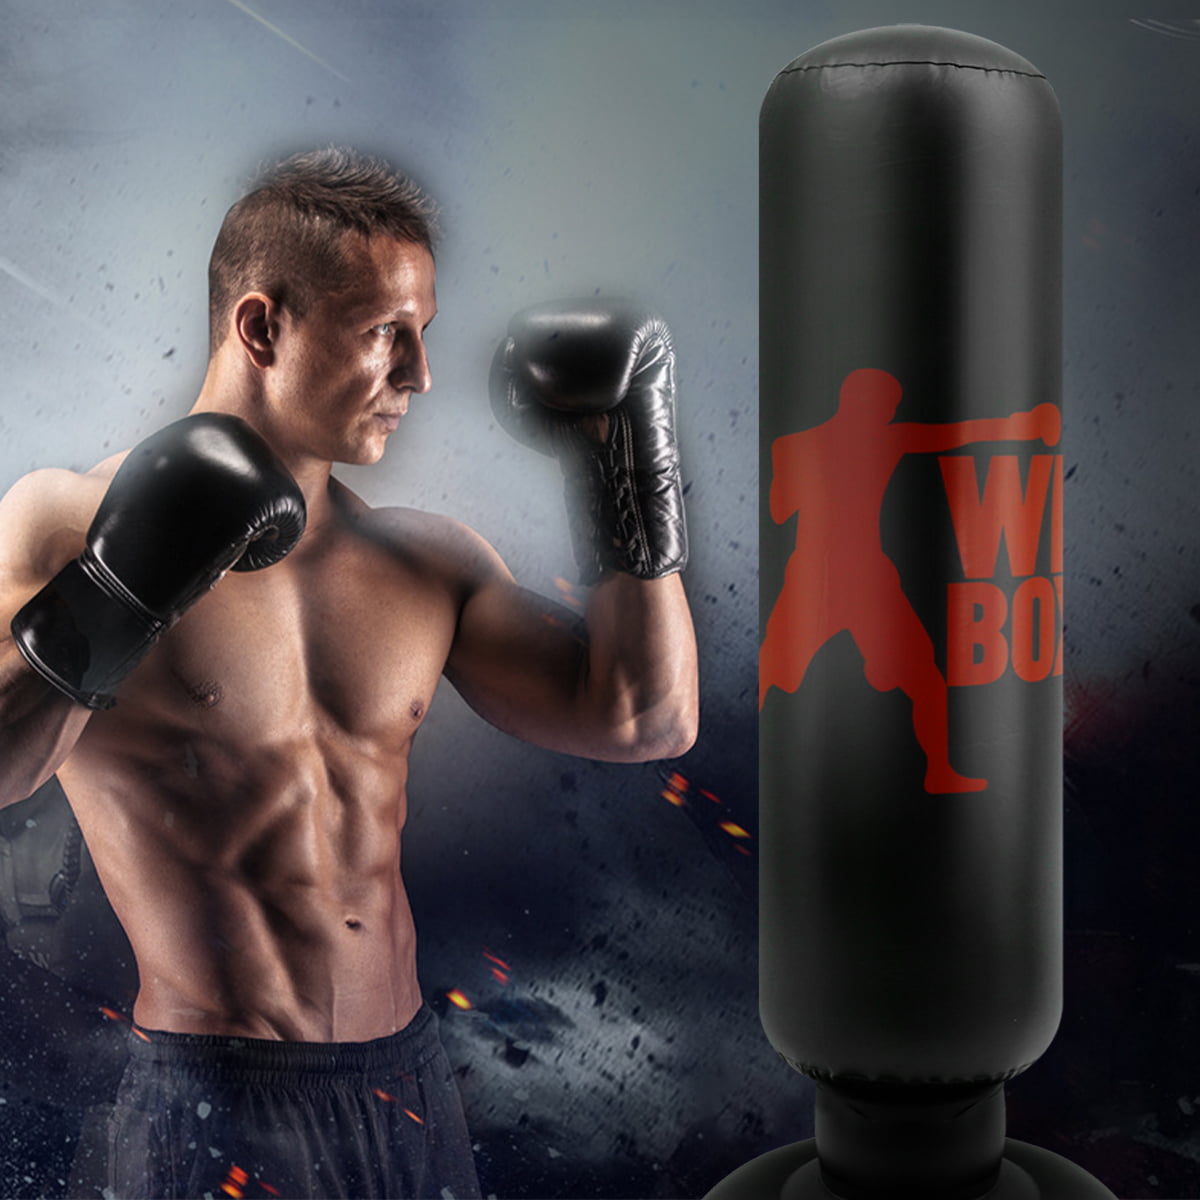 63 inch Inflatable Boxing Punching Bag Free Standing Adult Kid Fitness Training 